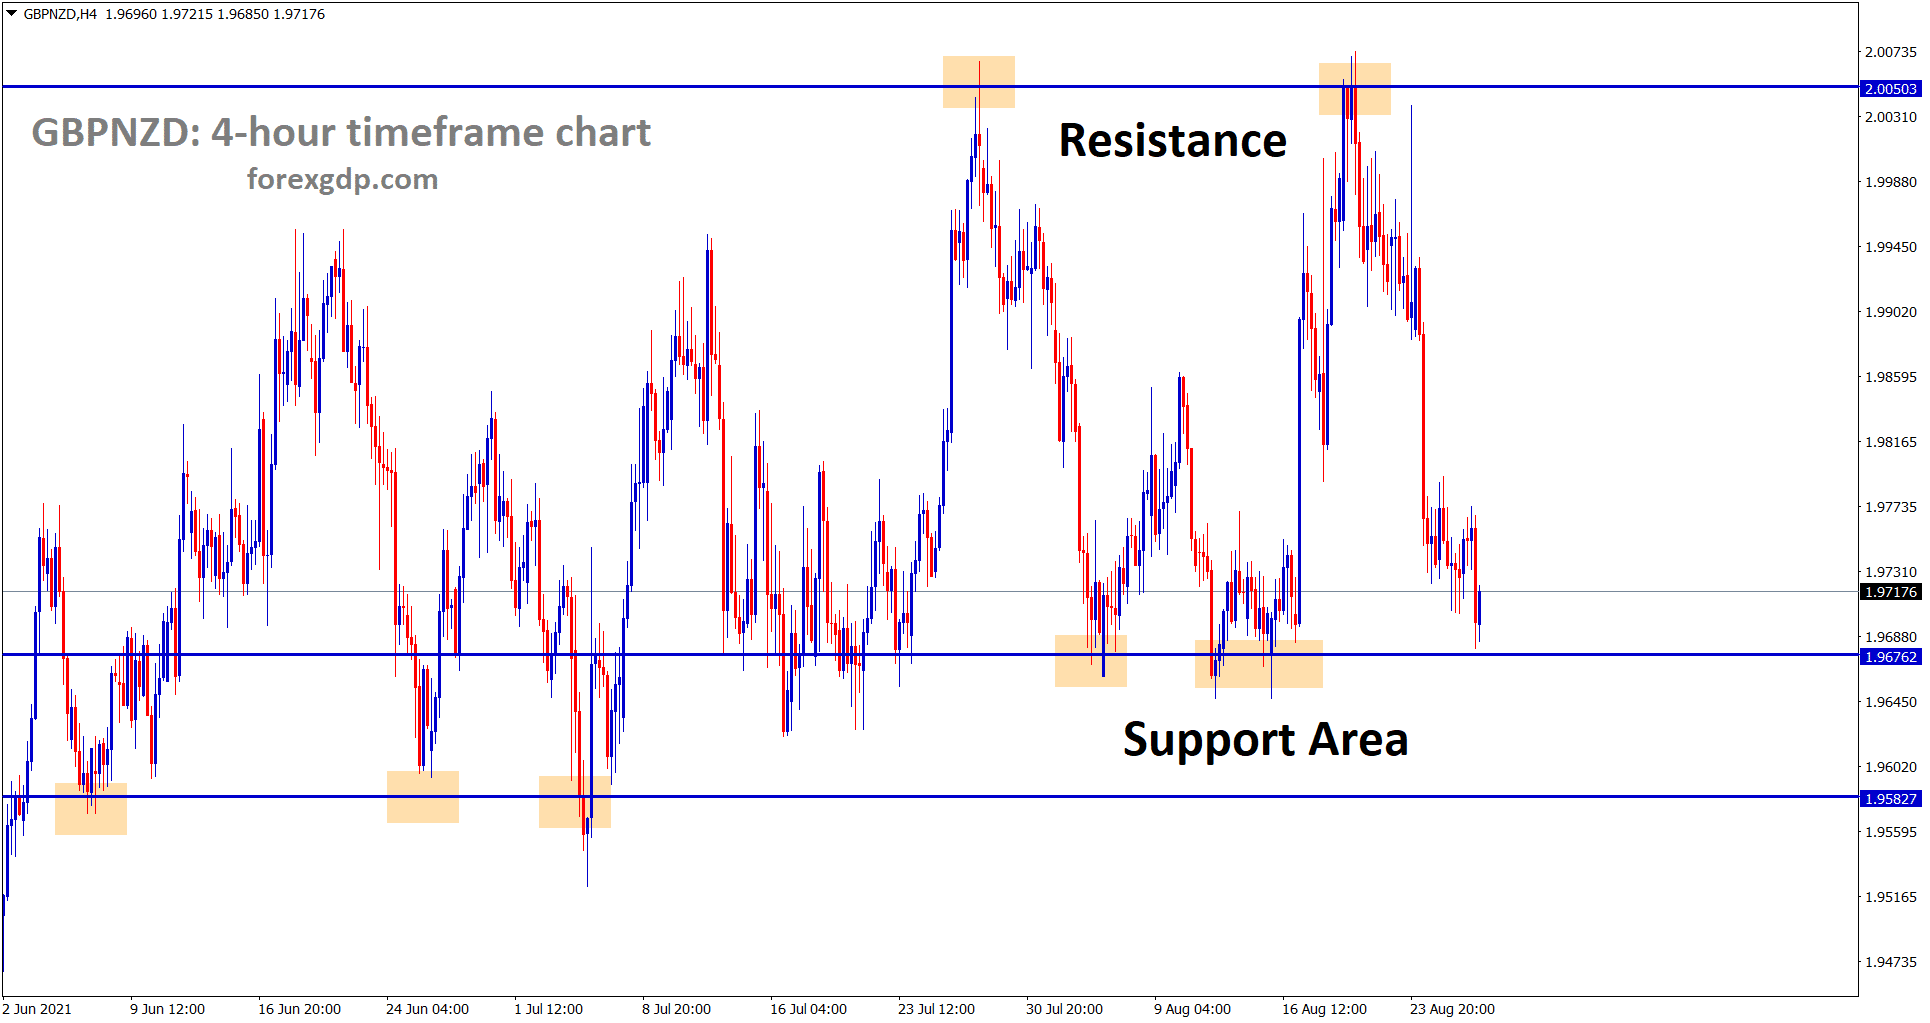 GBPNZD hits the support area again wait for reversal or breakout